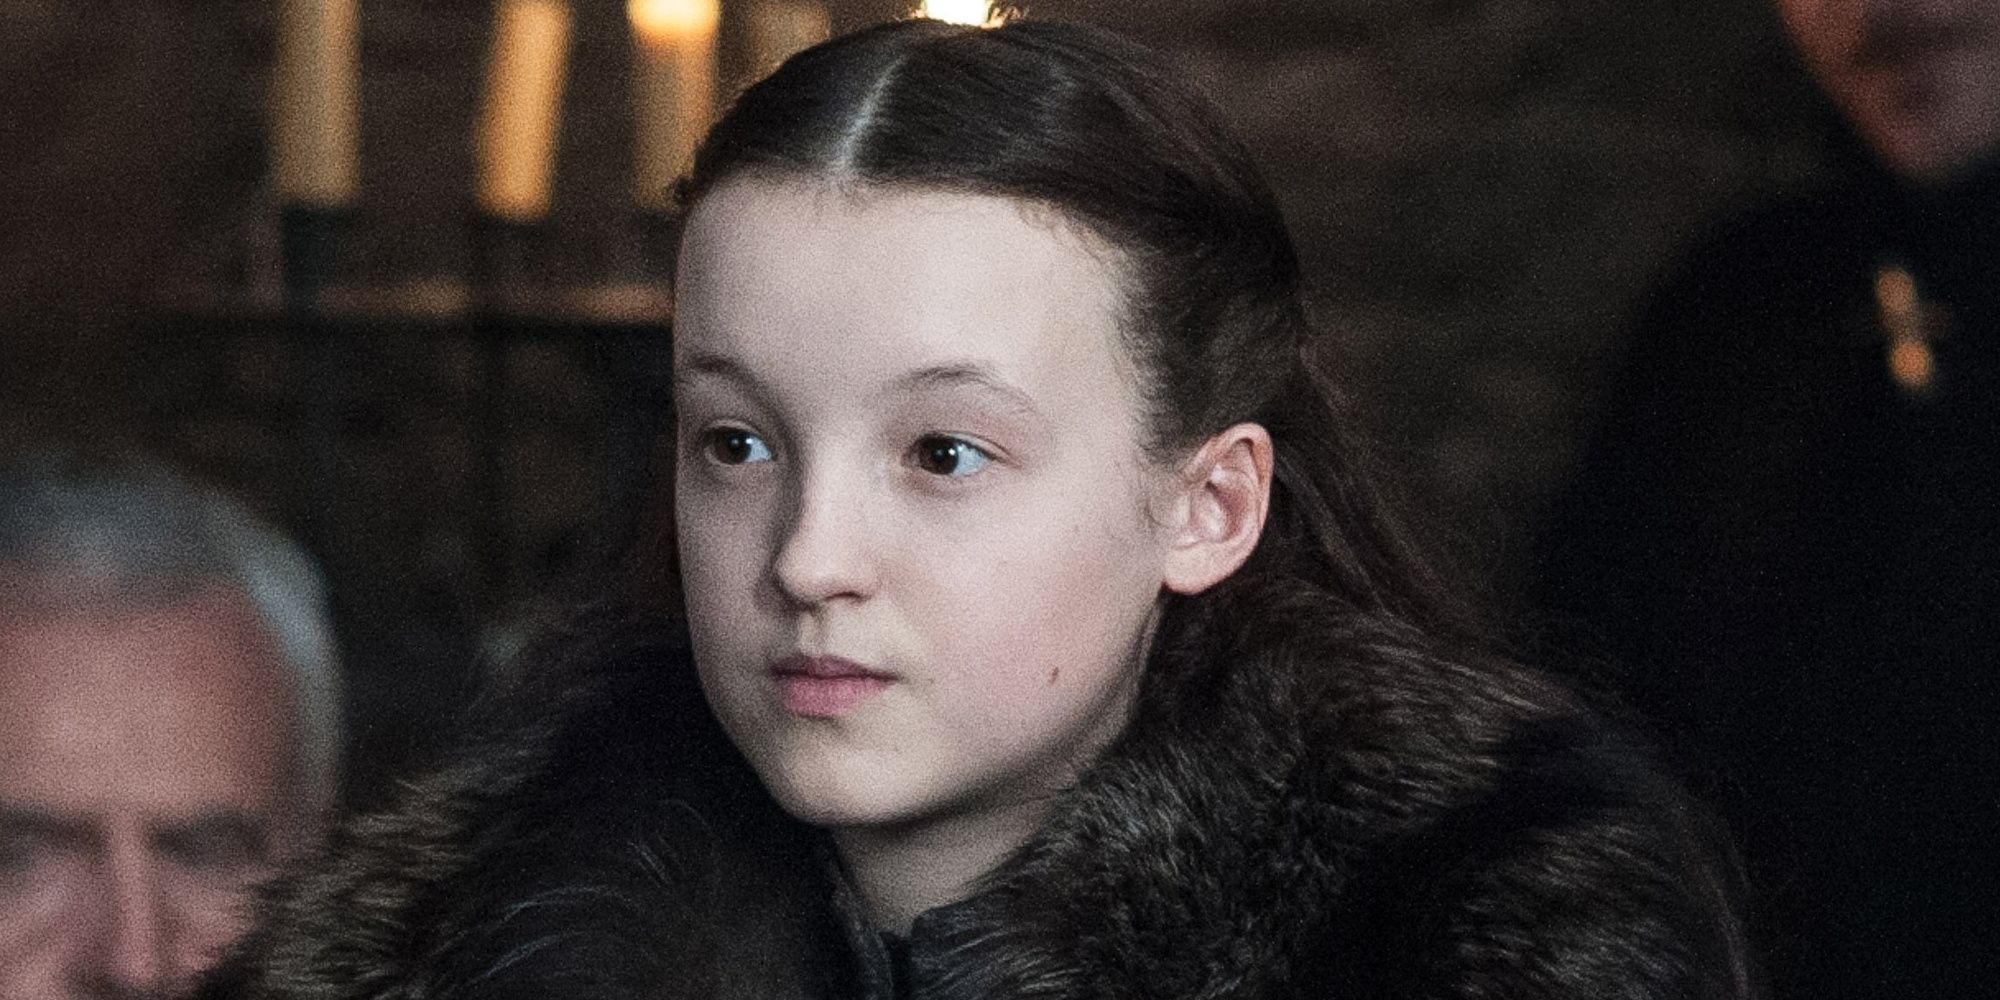 Lyanna Mormont addresses the Northern lords in Winterfell in Game of Thrones